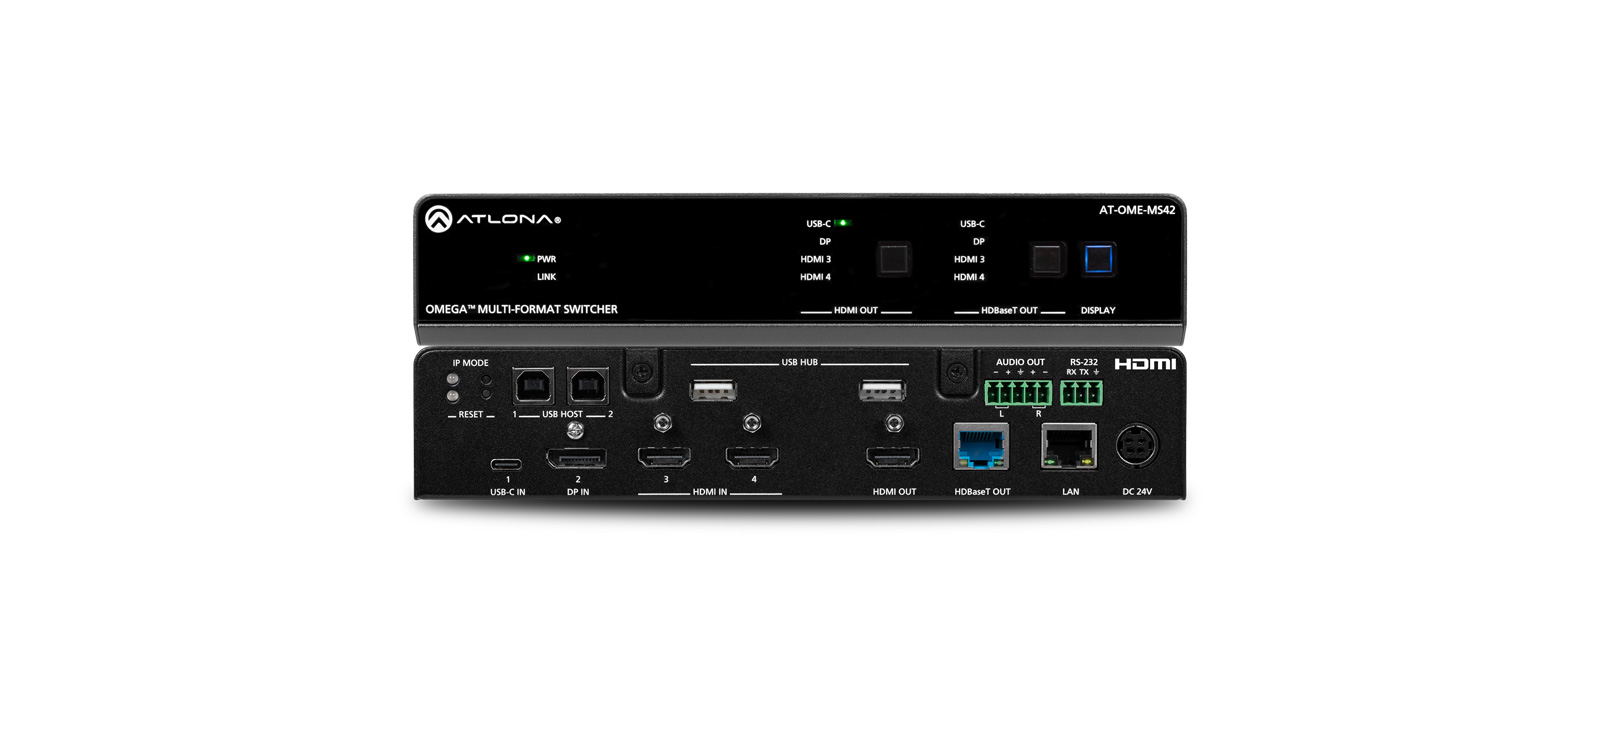 1 in 2 Out HDMI Displays 4K@60Hz HDMI Splitter with Scalar HDMI Support  HDCP 2.2